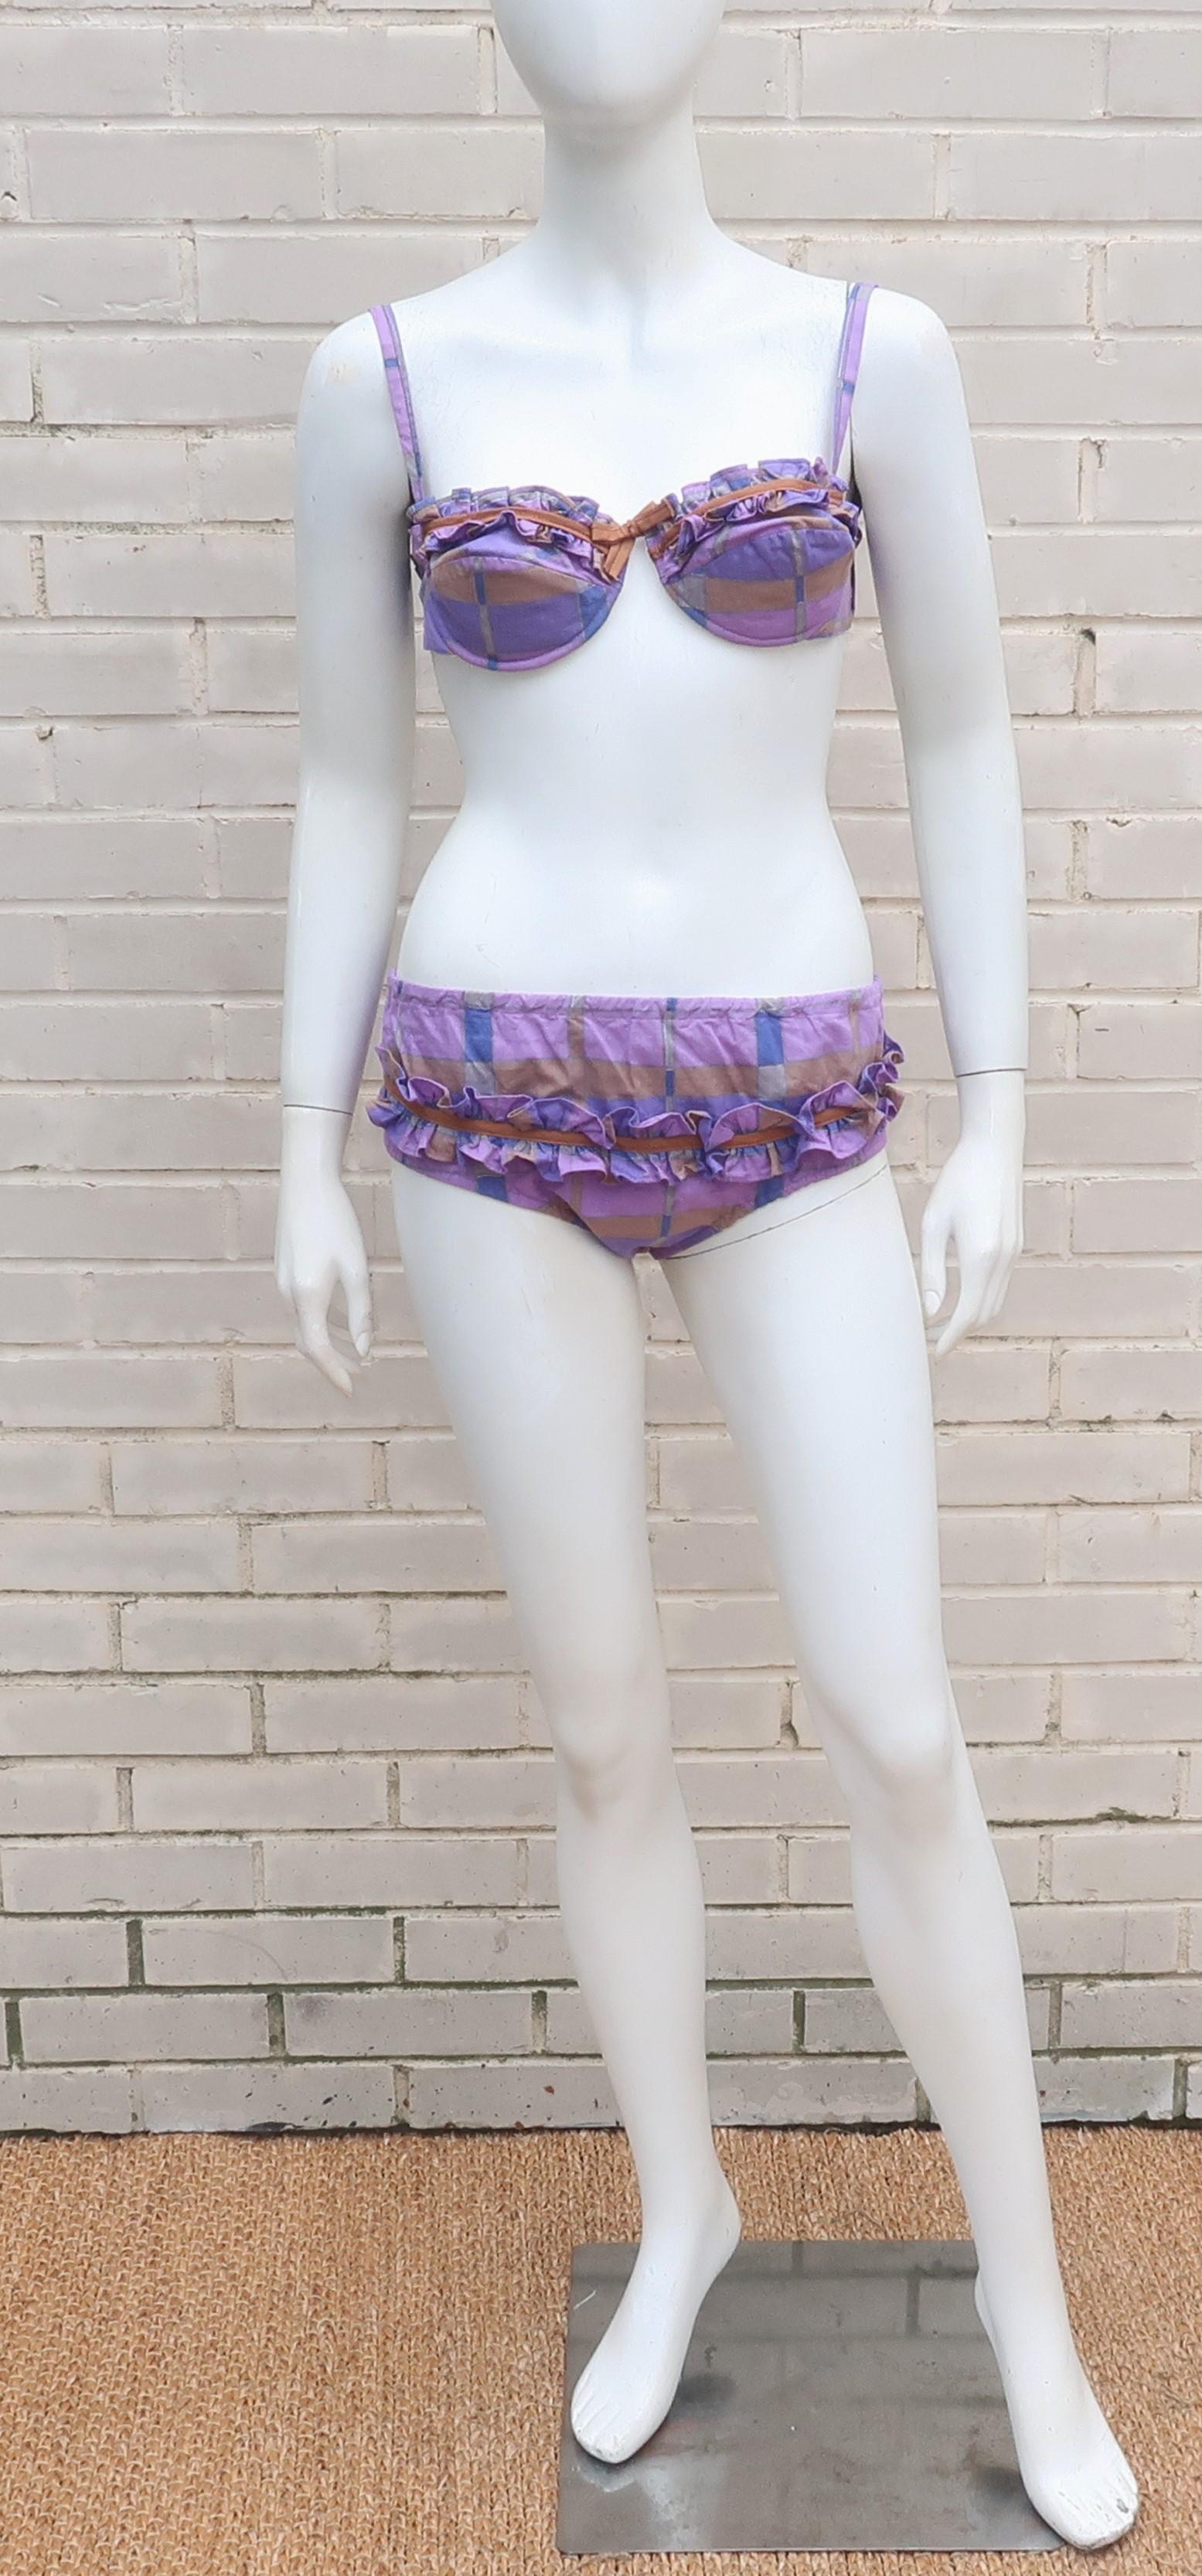 Gidget alert!  1960's two piece bikini in a comfortable cotton purple and cognac brown plaid with ruffled details.  The top is constructed with molded underwire cups lined with built-in pads, adjustable shoulder straps and elasticized hook at the